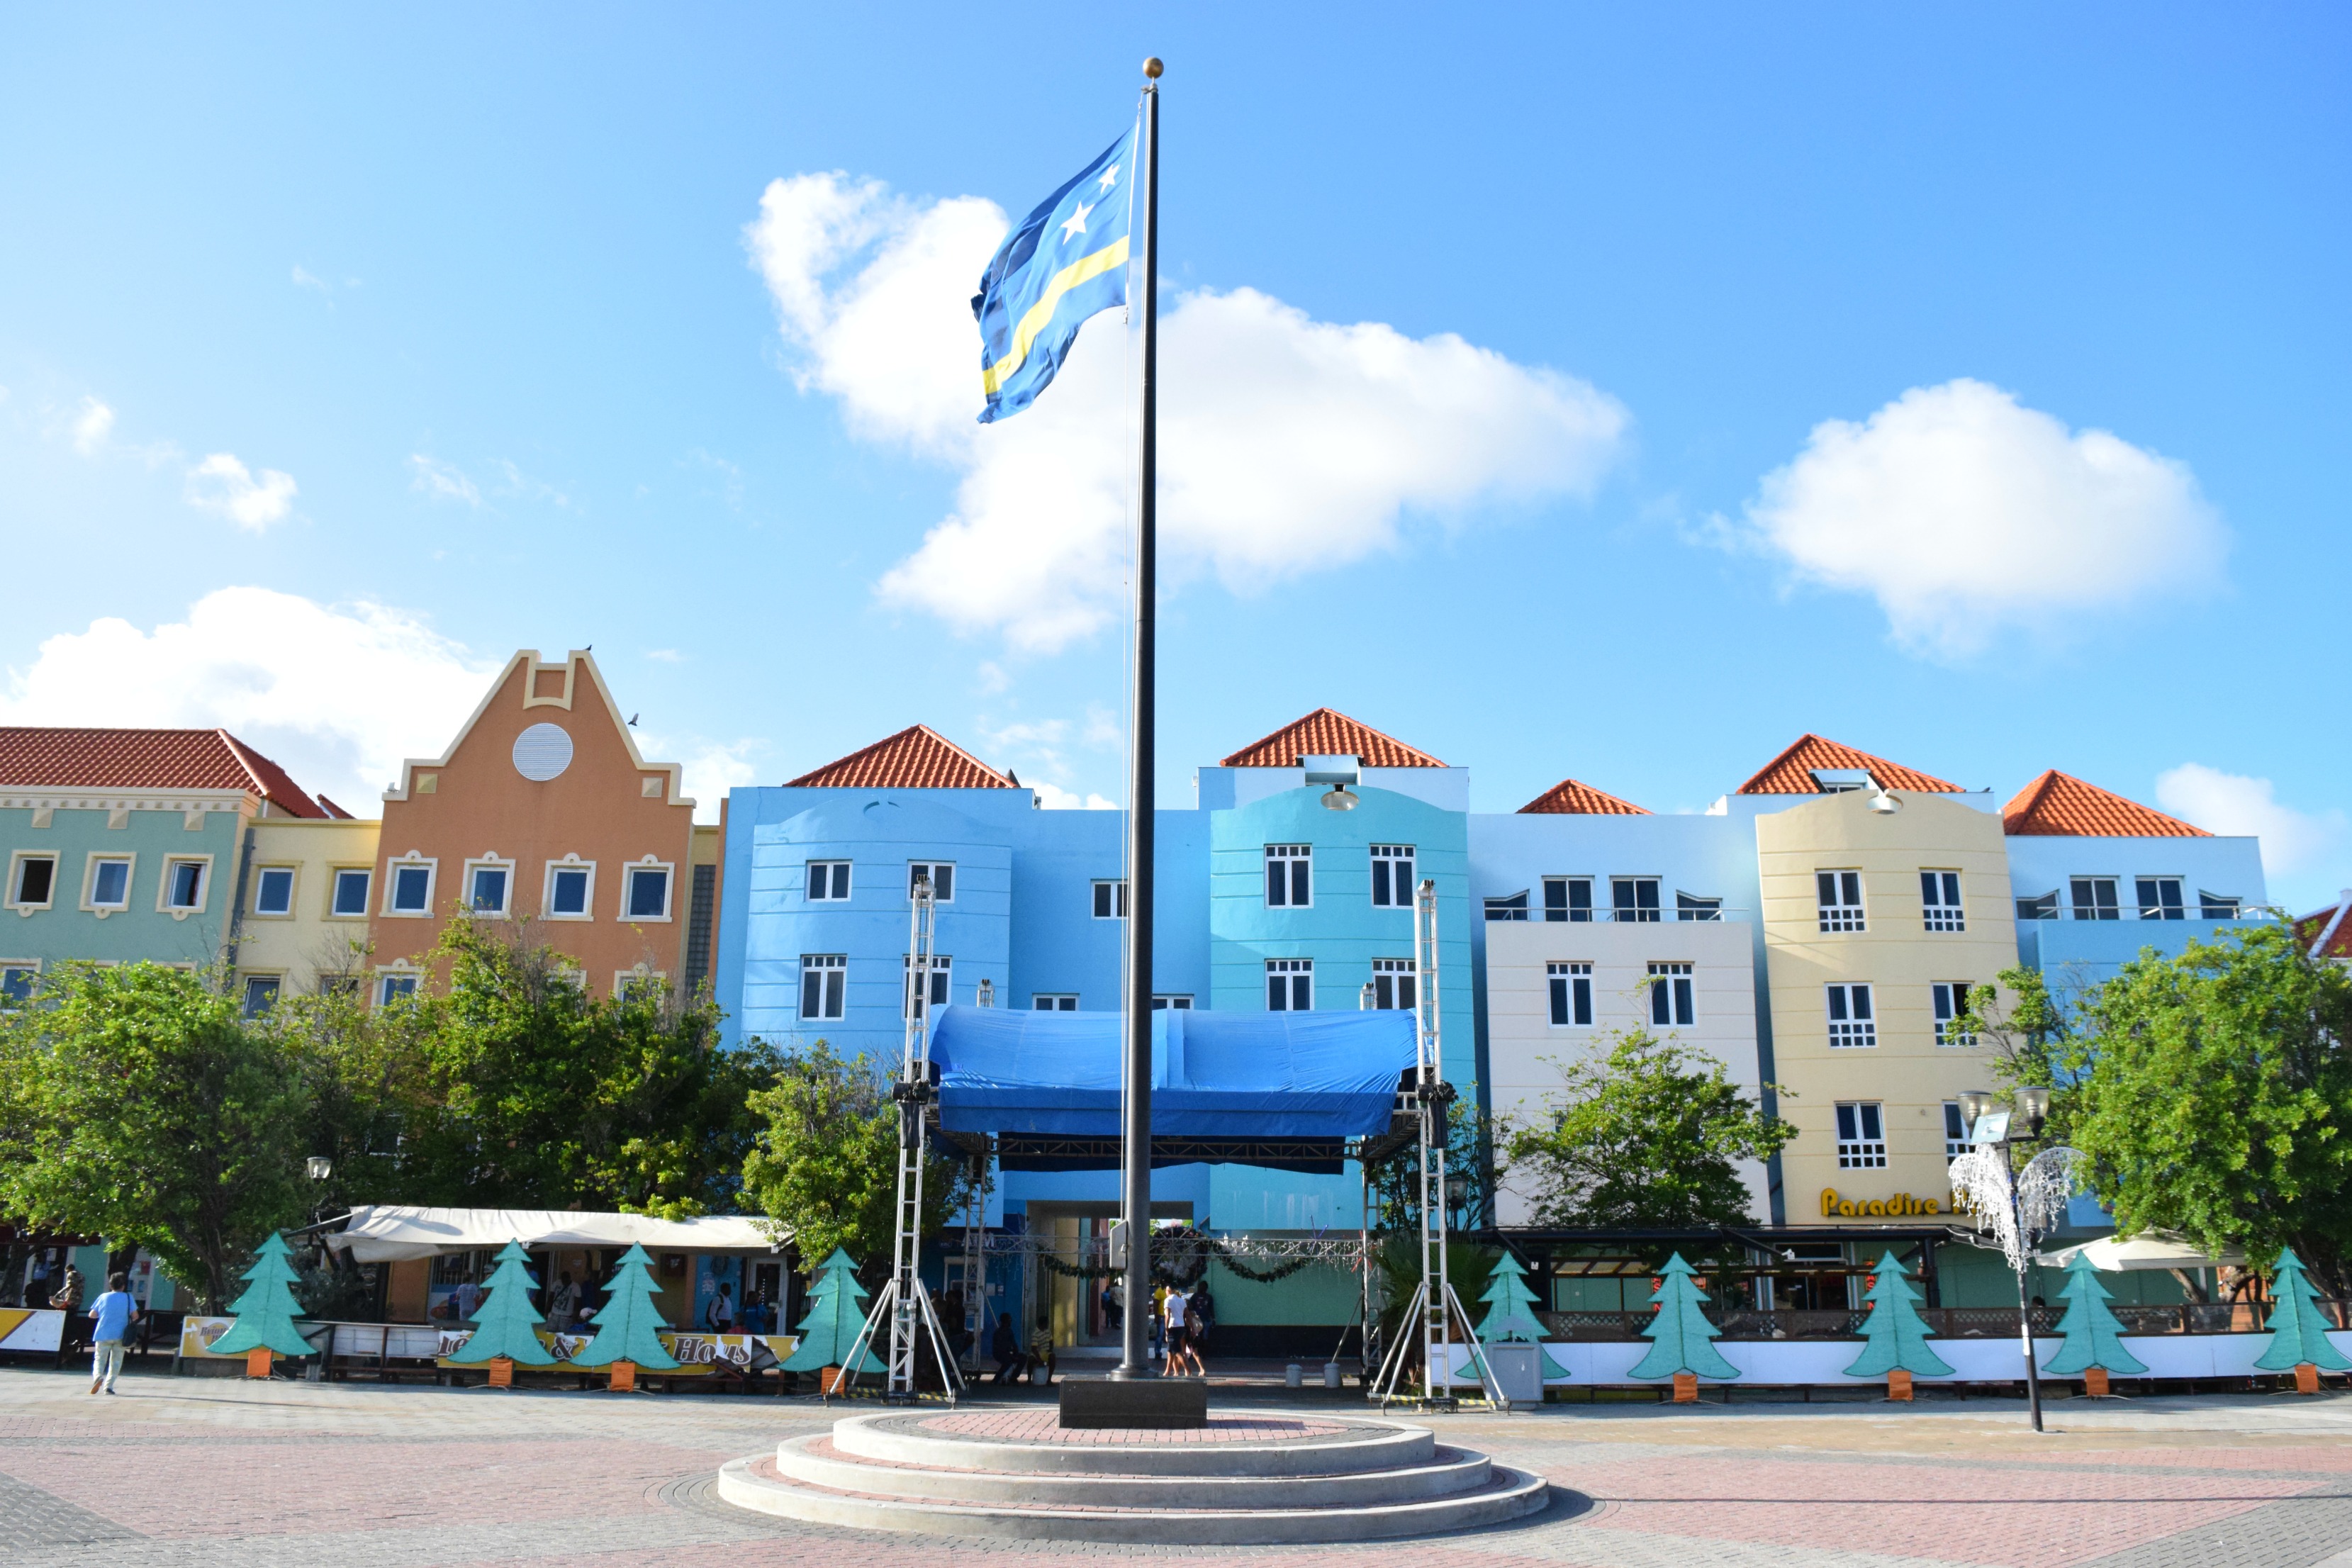 vibrant-colors-willemstad-curacao-35